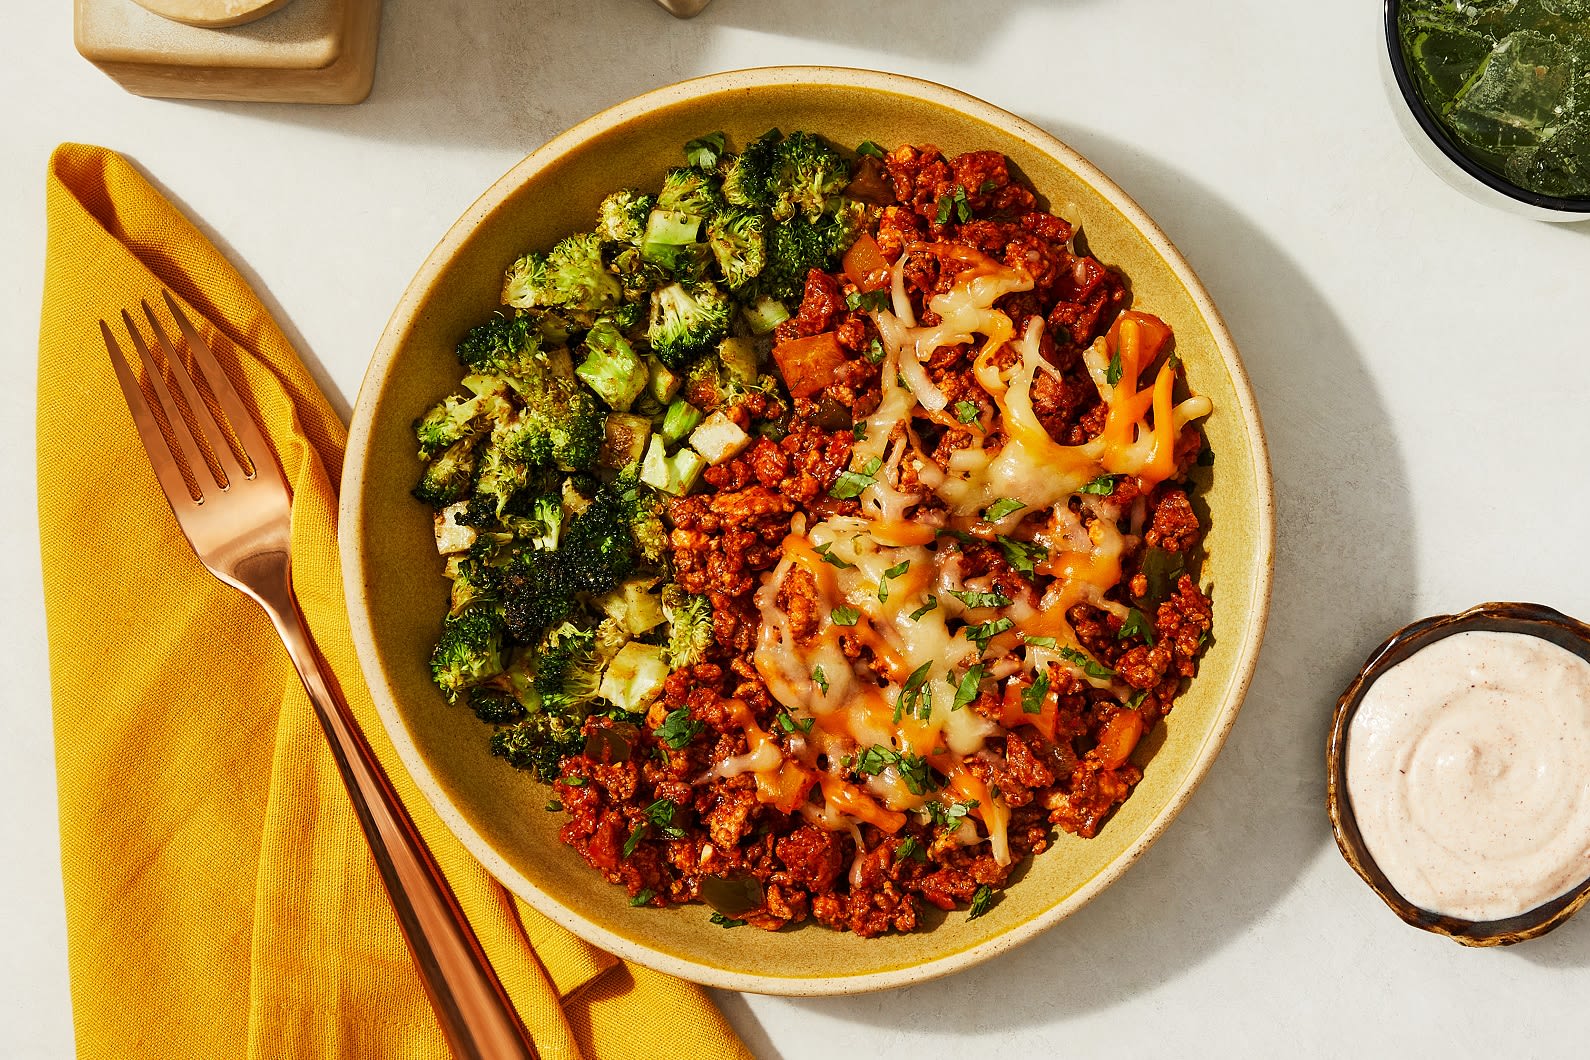 Chef-Prepared, Dietitian-Approved Meals